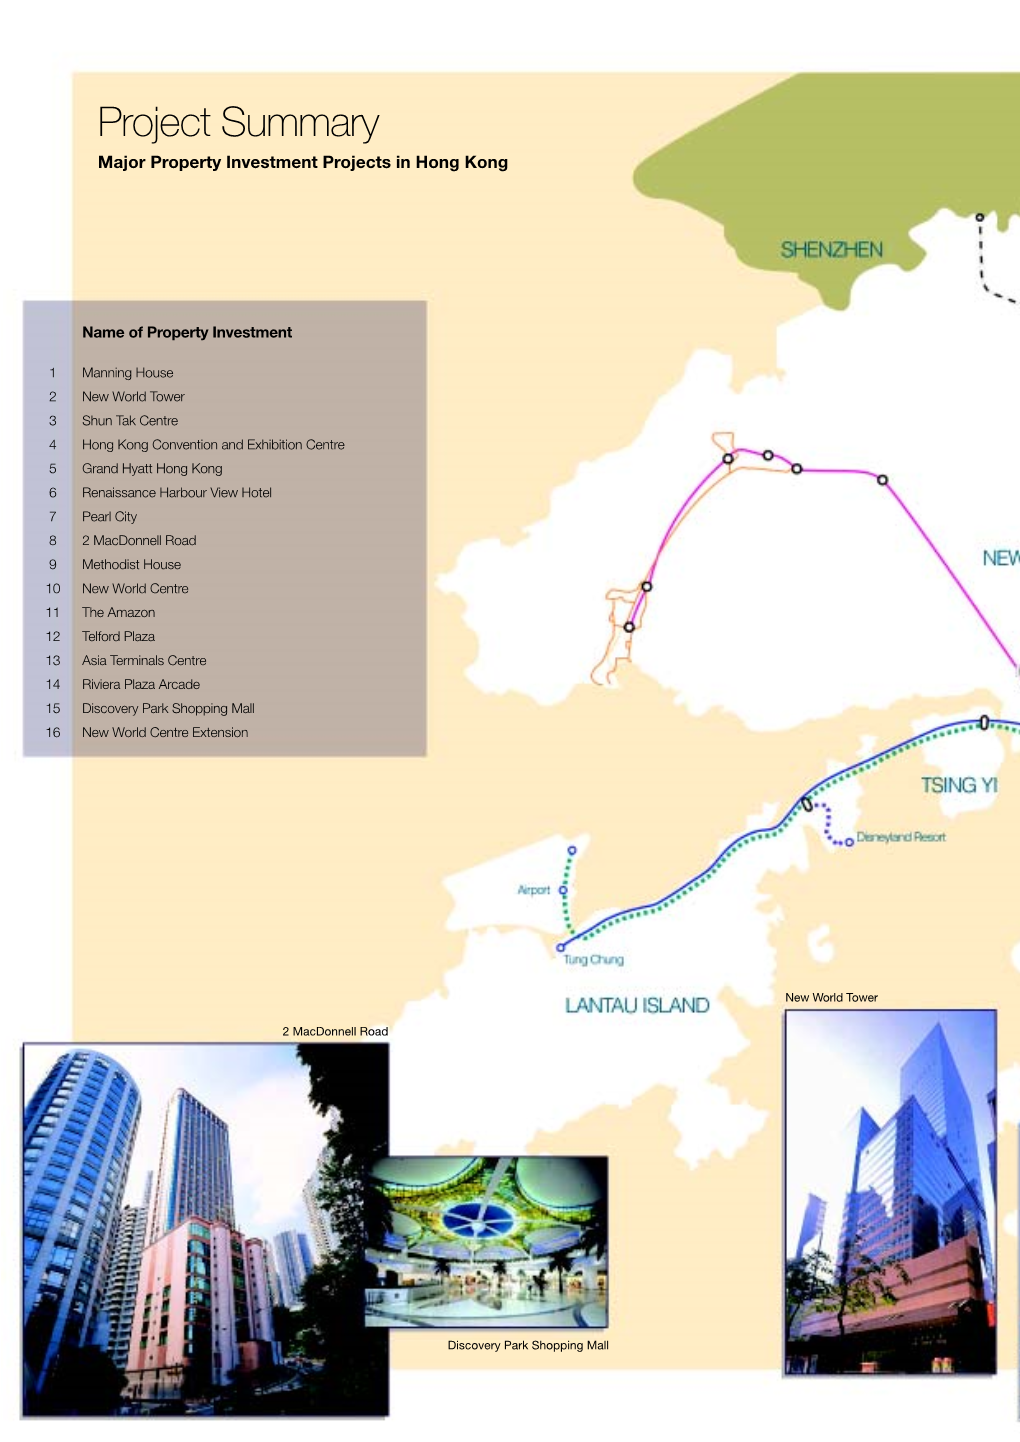 Major Property Investment Projects in Hong Kong